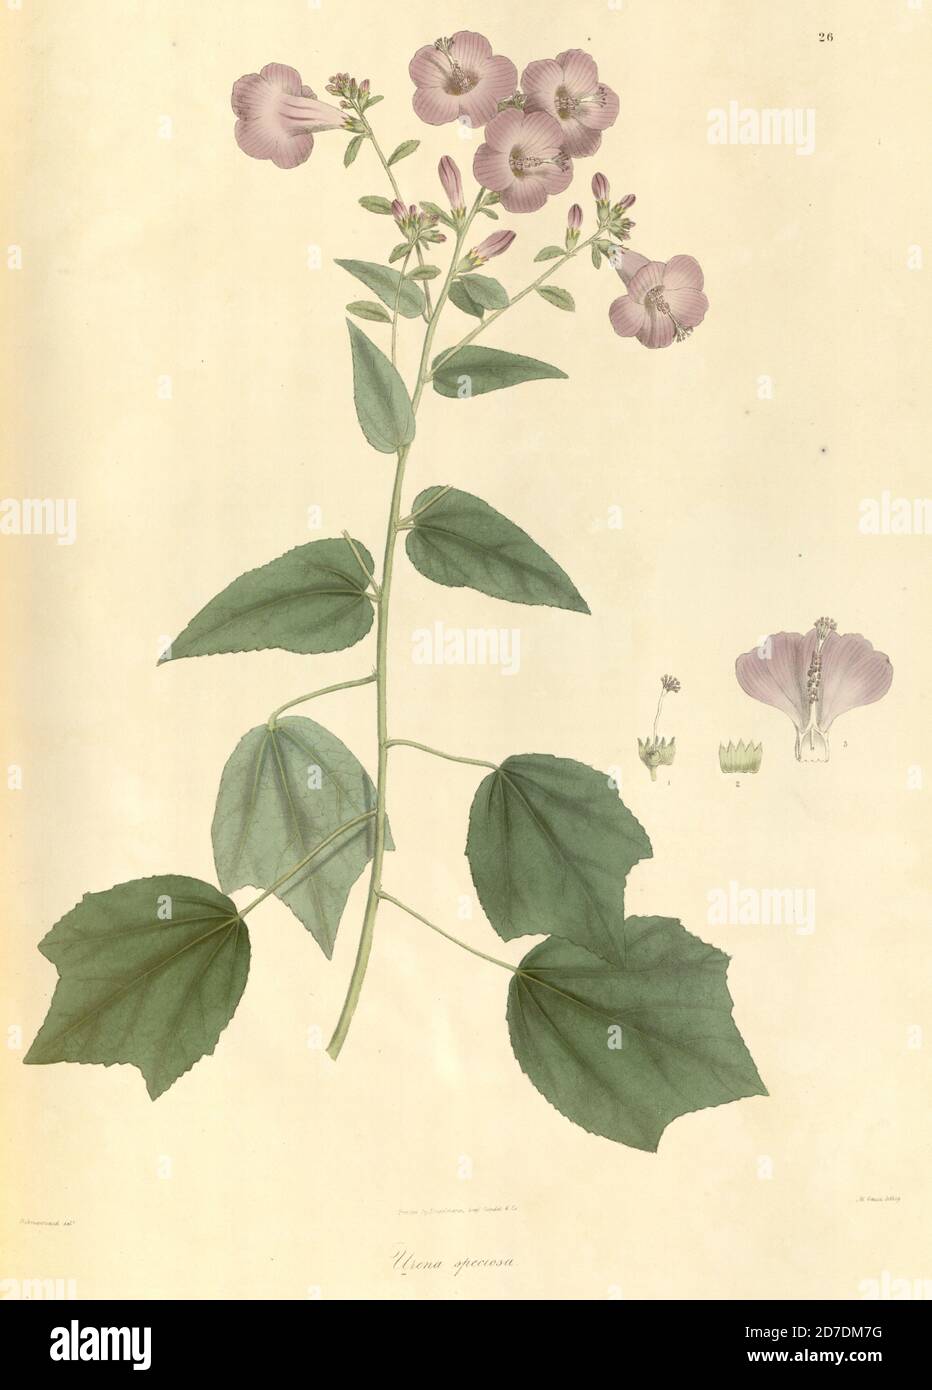 Urena repanda Roxb. Syn Urena speciosa From Plantae Asiaticae rariores, or, Descriptions and figures of a select number of unpublished East Indian plants Volume 1 by N. Wallich. Nathaniel Wolff Wallich FRS FRSE (28 January 1786 – 28 April 1854) was a surgeon and botanist of Danish origin who worked in India, initially in the Danish settlement near Calcutta and later for the Danish East India Company and the British East India Company. He was involved in the early development of the Calcutta Botanical Garden, describing many new plant species and developing a large herbarium collection which wa Stock Photo